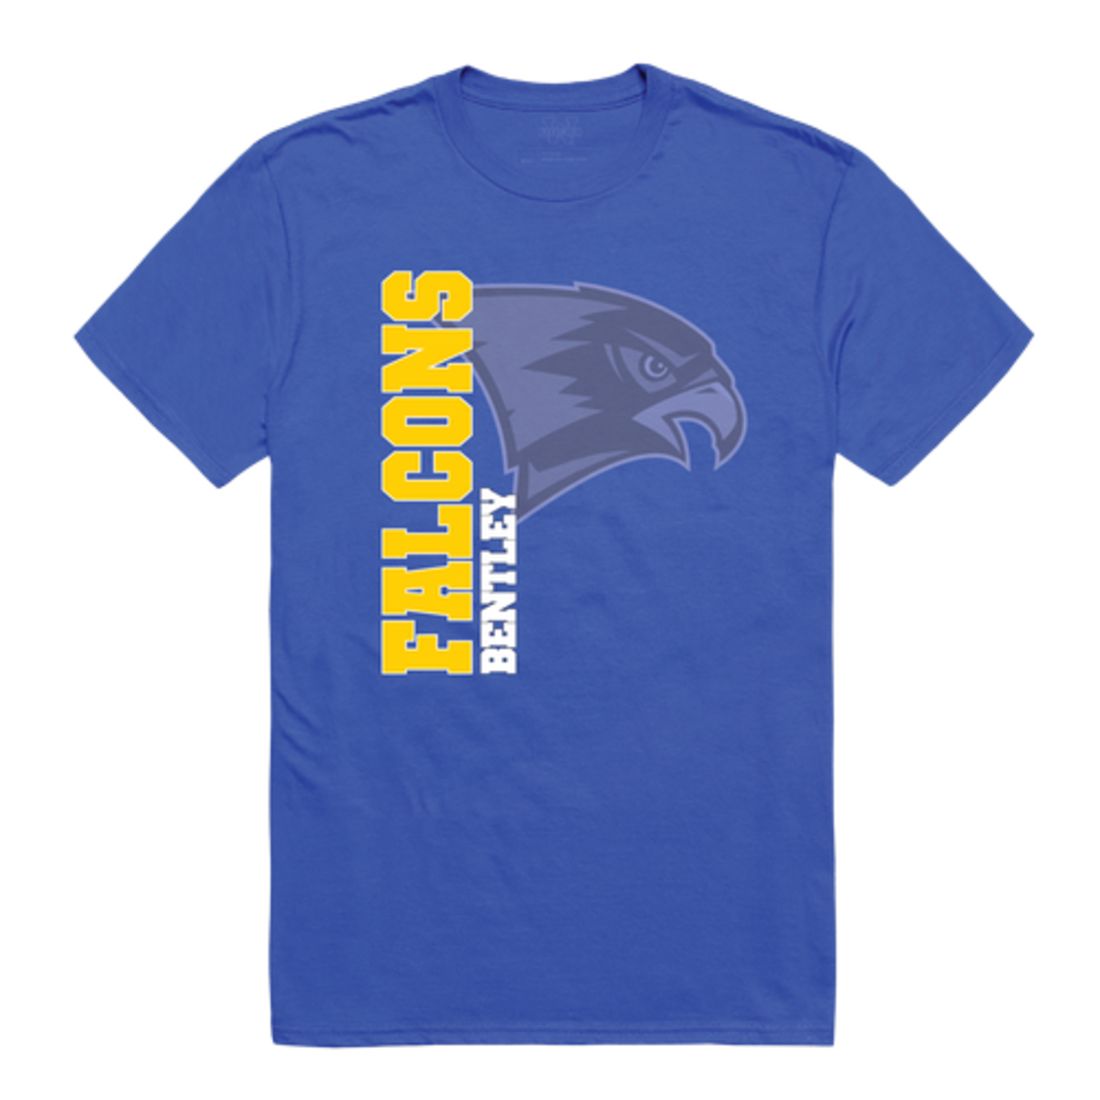 Bentley University Falcons Ghost College T-Shirt